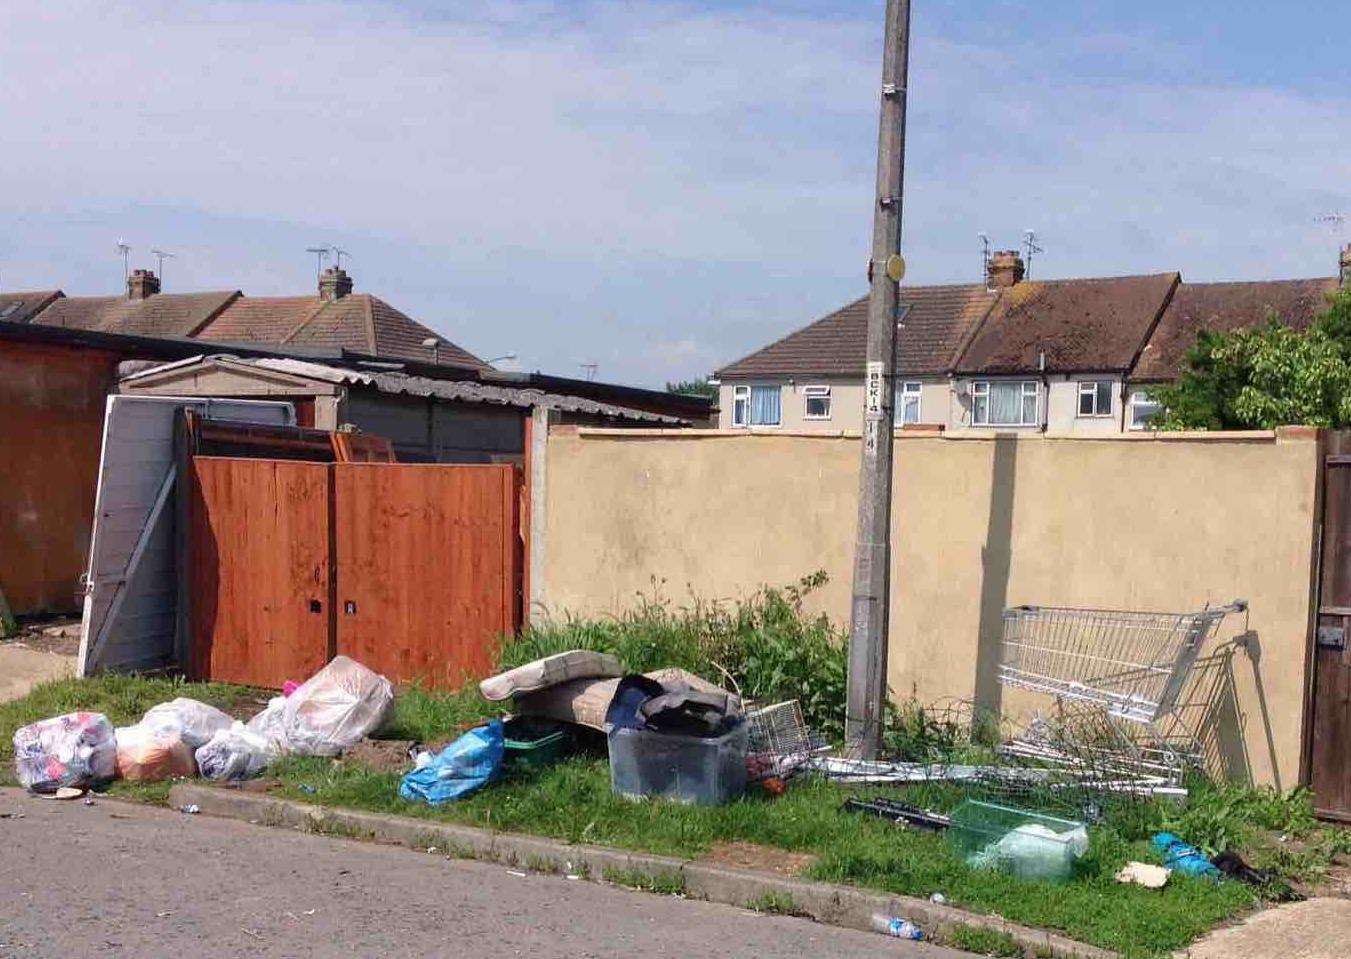 Fibich admitted five fly-tipping offences